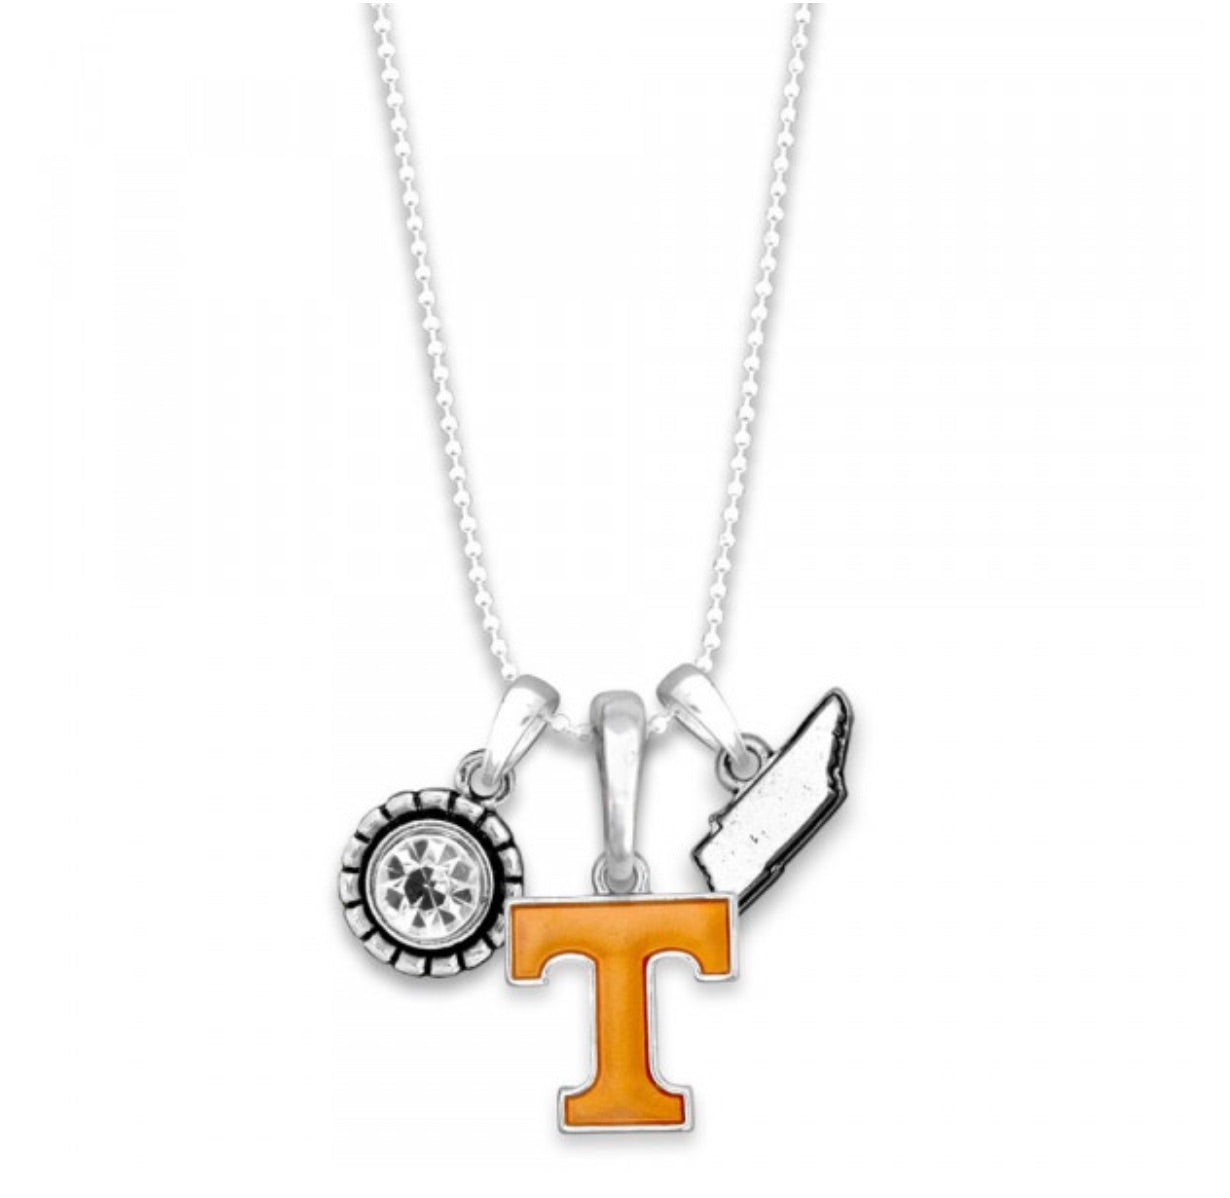 College Teams Necklace with University Logo, Charms & Stone